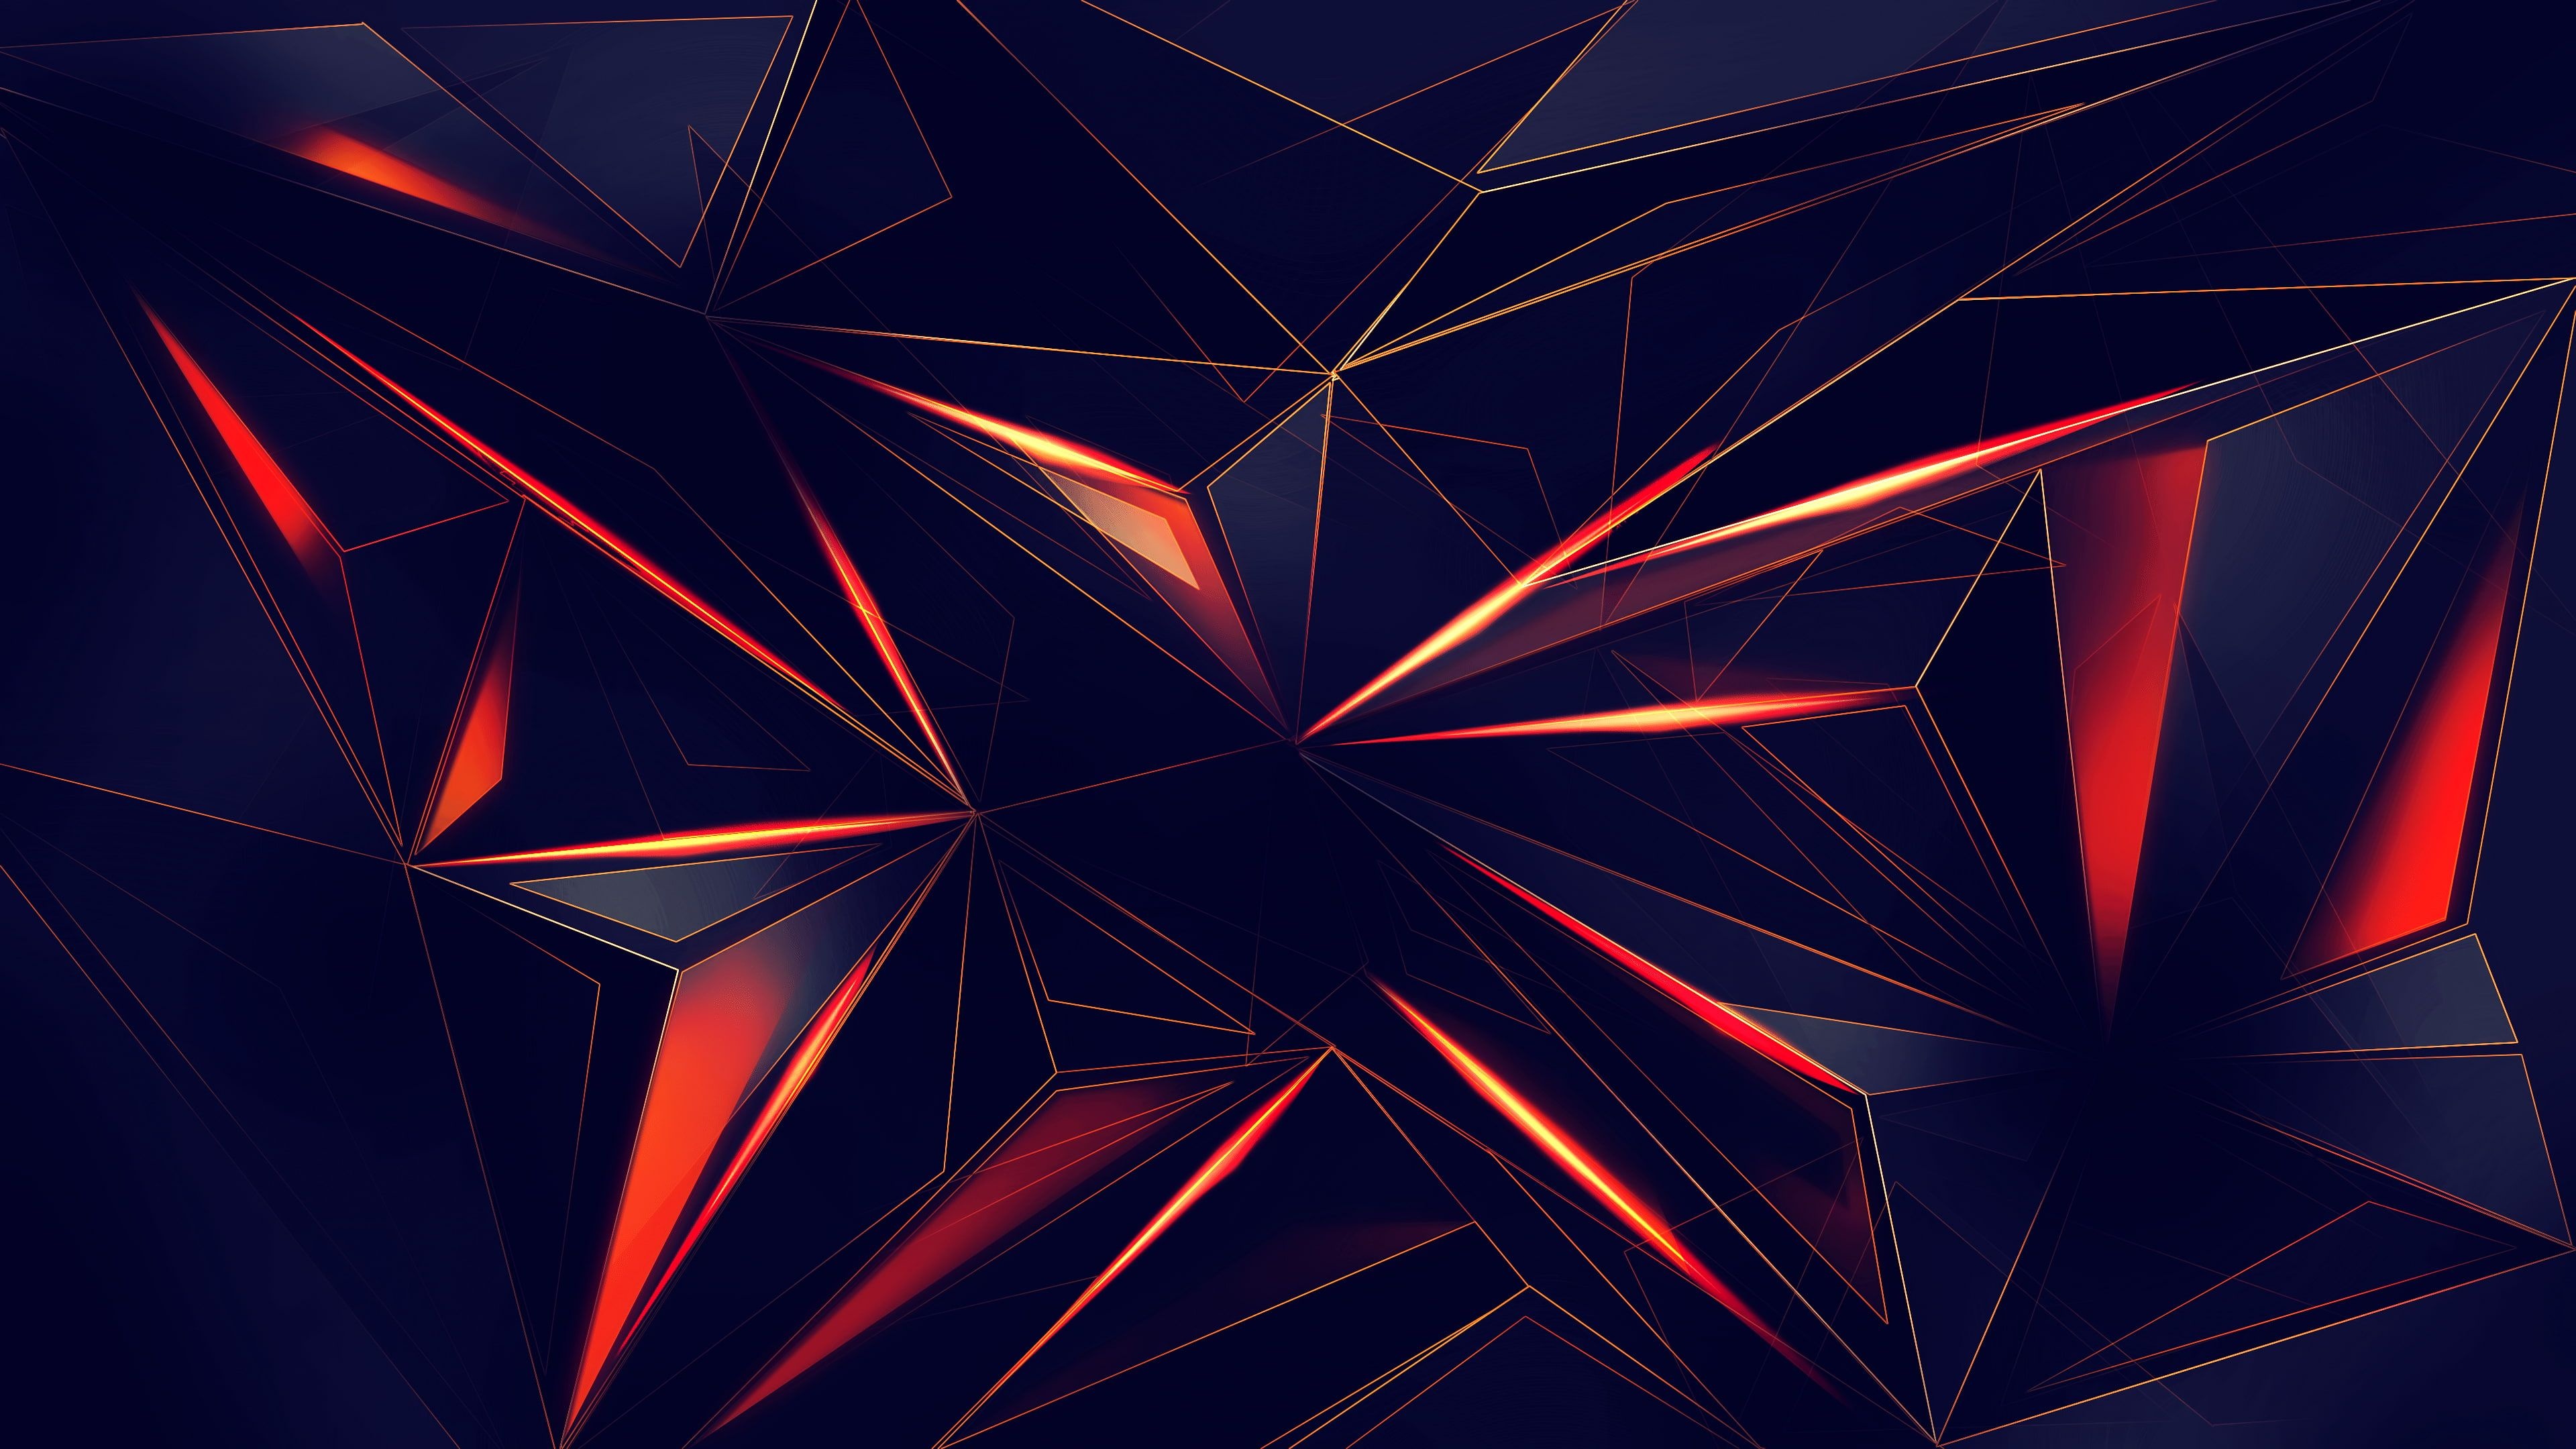 Backdrop: Abstract polygonal figures, Supplementary angles, Intersecting line segments. 3840x2160 4K Wallpaper.